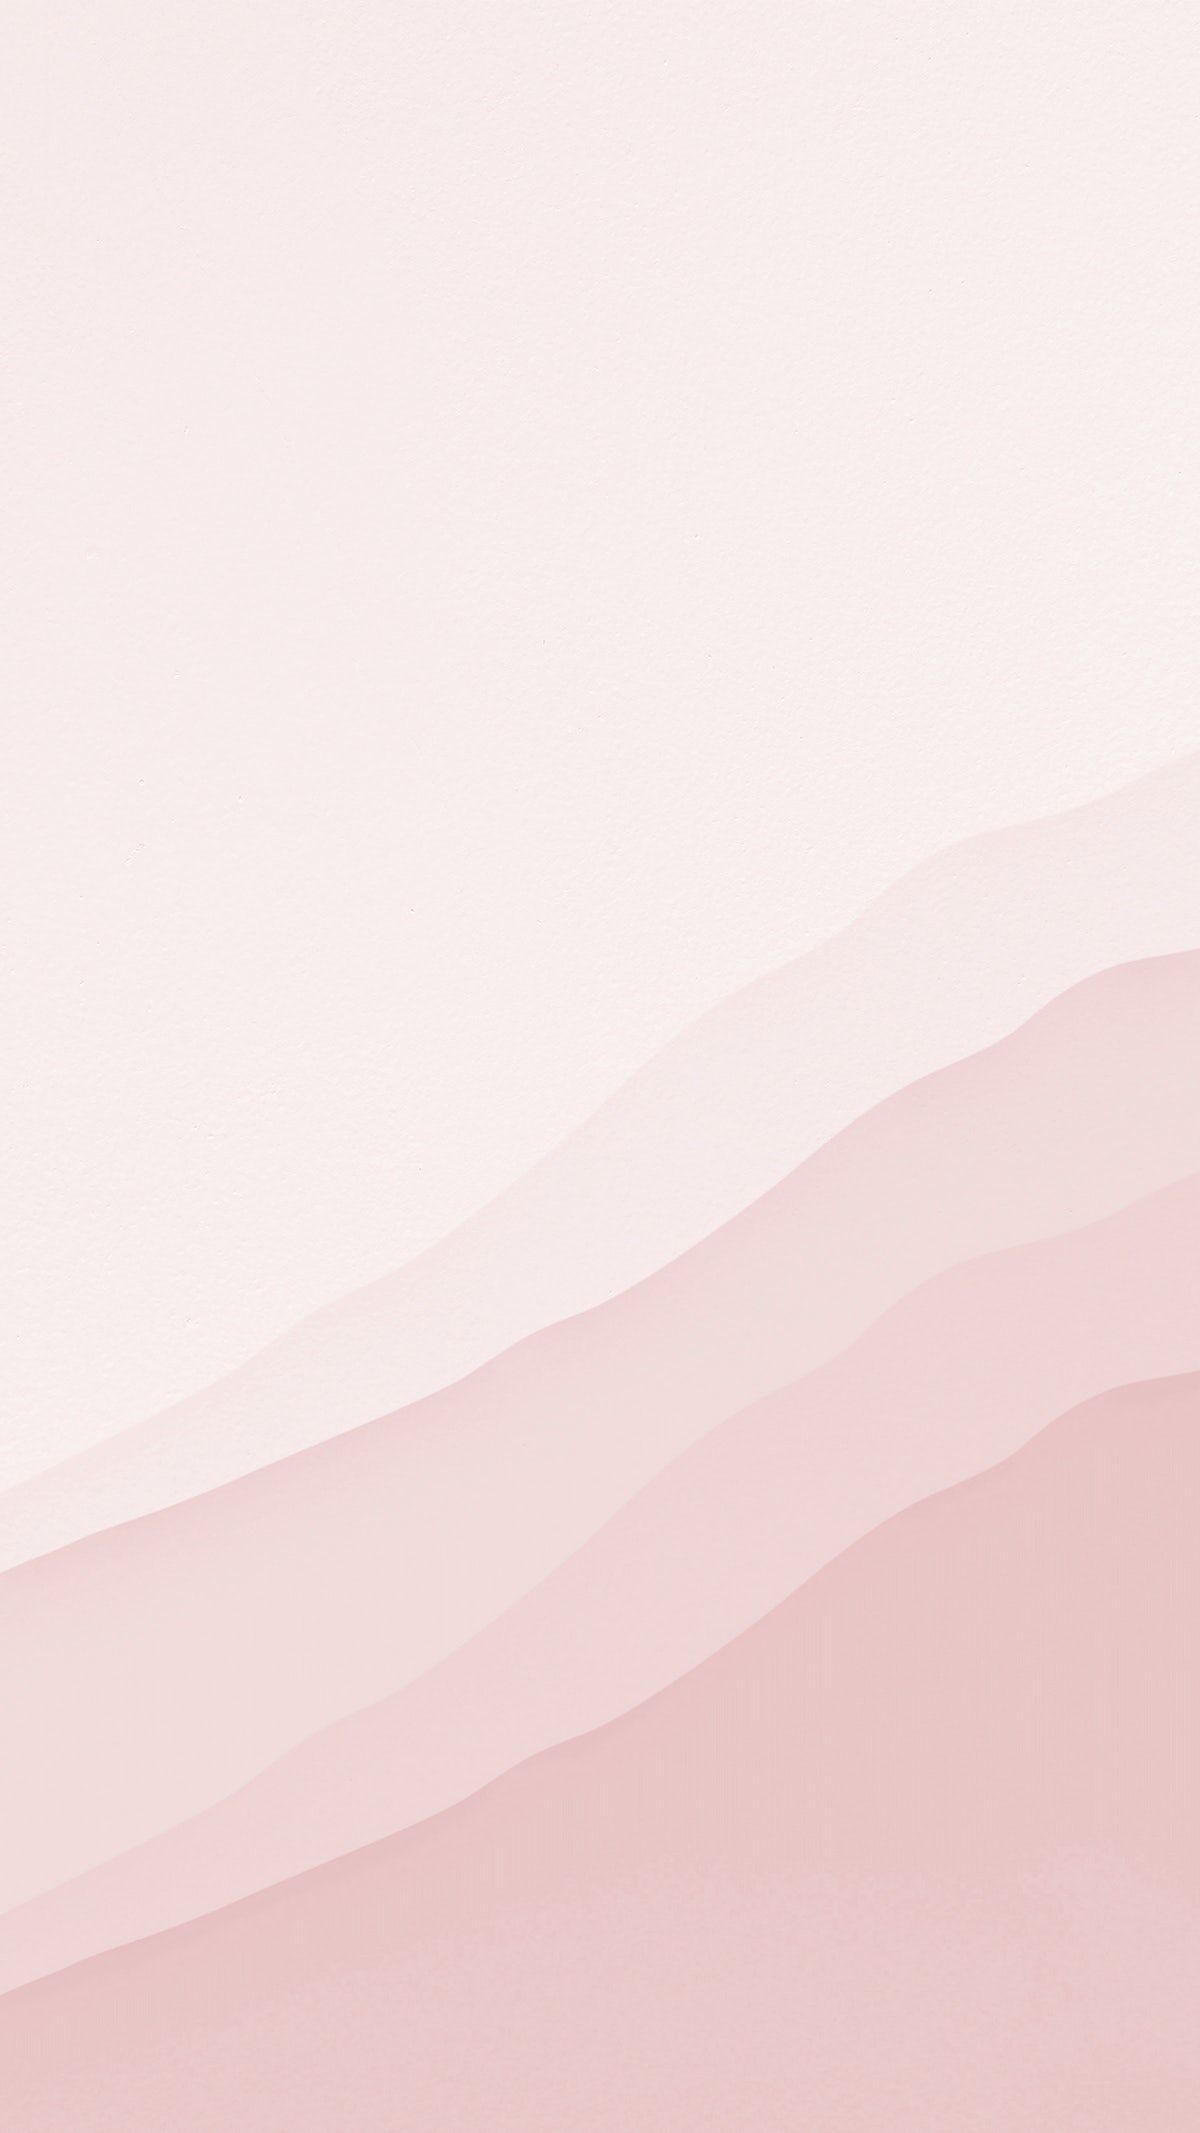 Download free illustration of Abstract light pink wallpaper